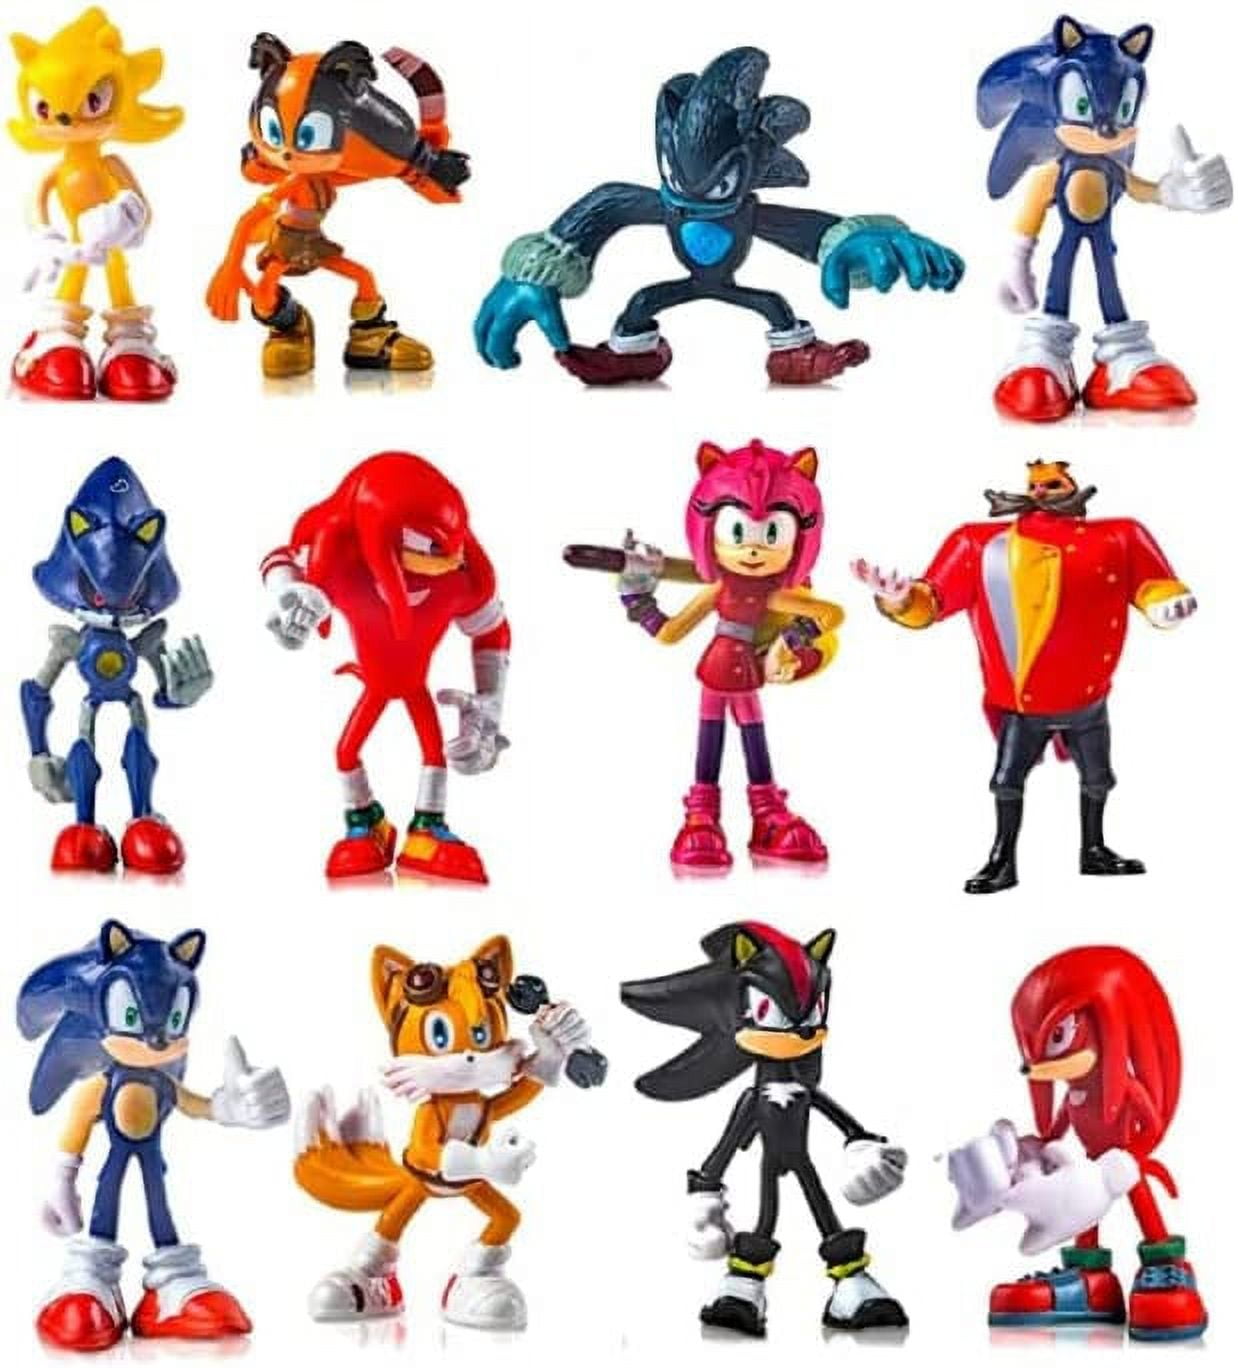 J&G Sonic the Hedgehog Toys Action Figures 2.5 inch, Pack of 12, Perfect  Gifts for Boys and Girls Versatile Sonic Toy Party Supplies Cake Toppers,  Series Collectible 